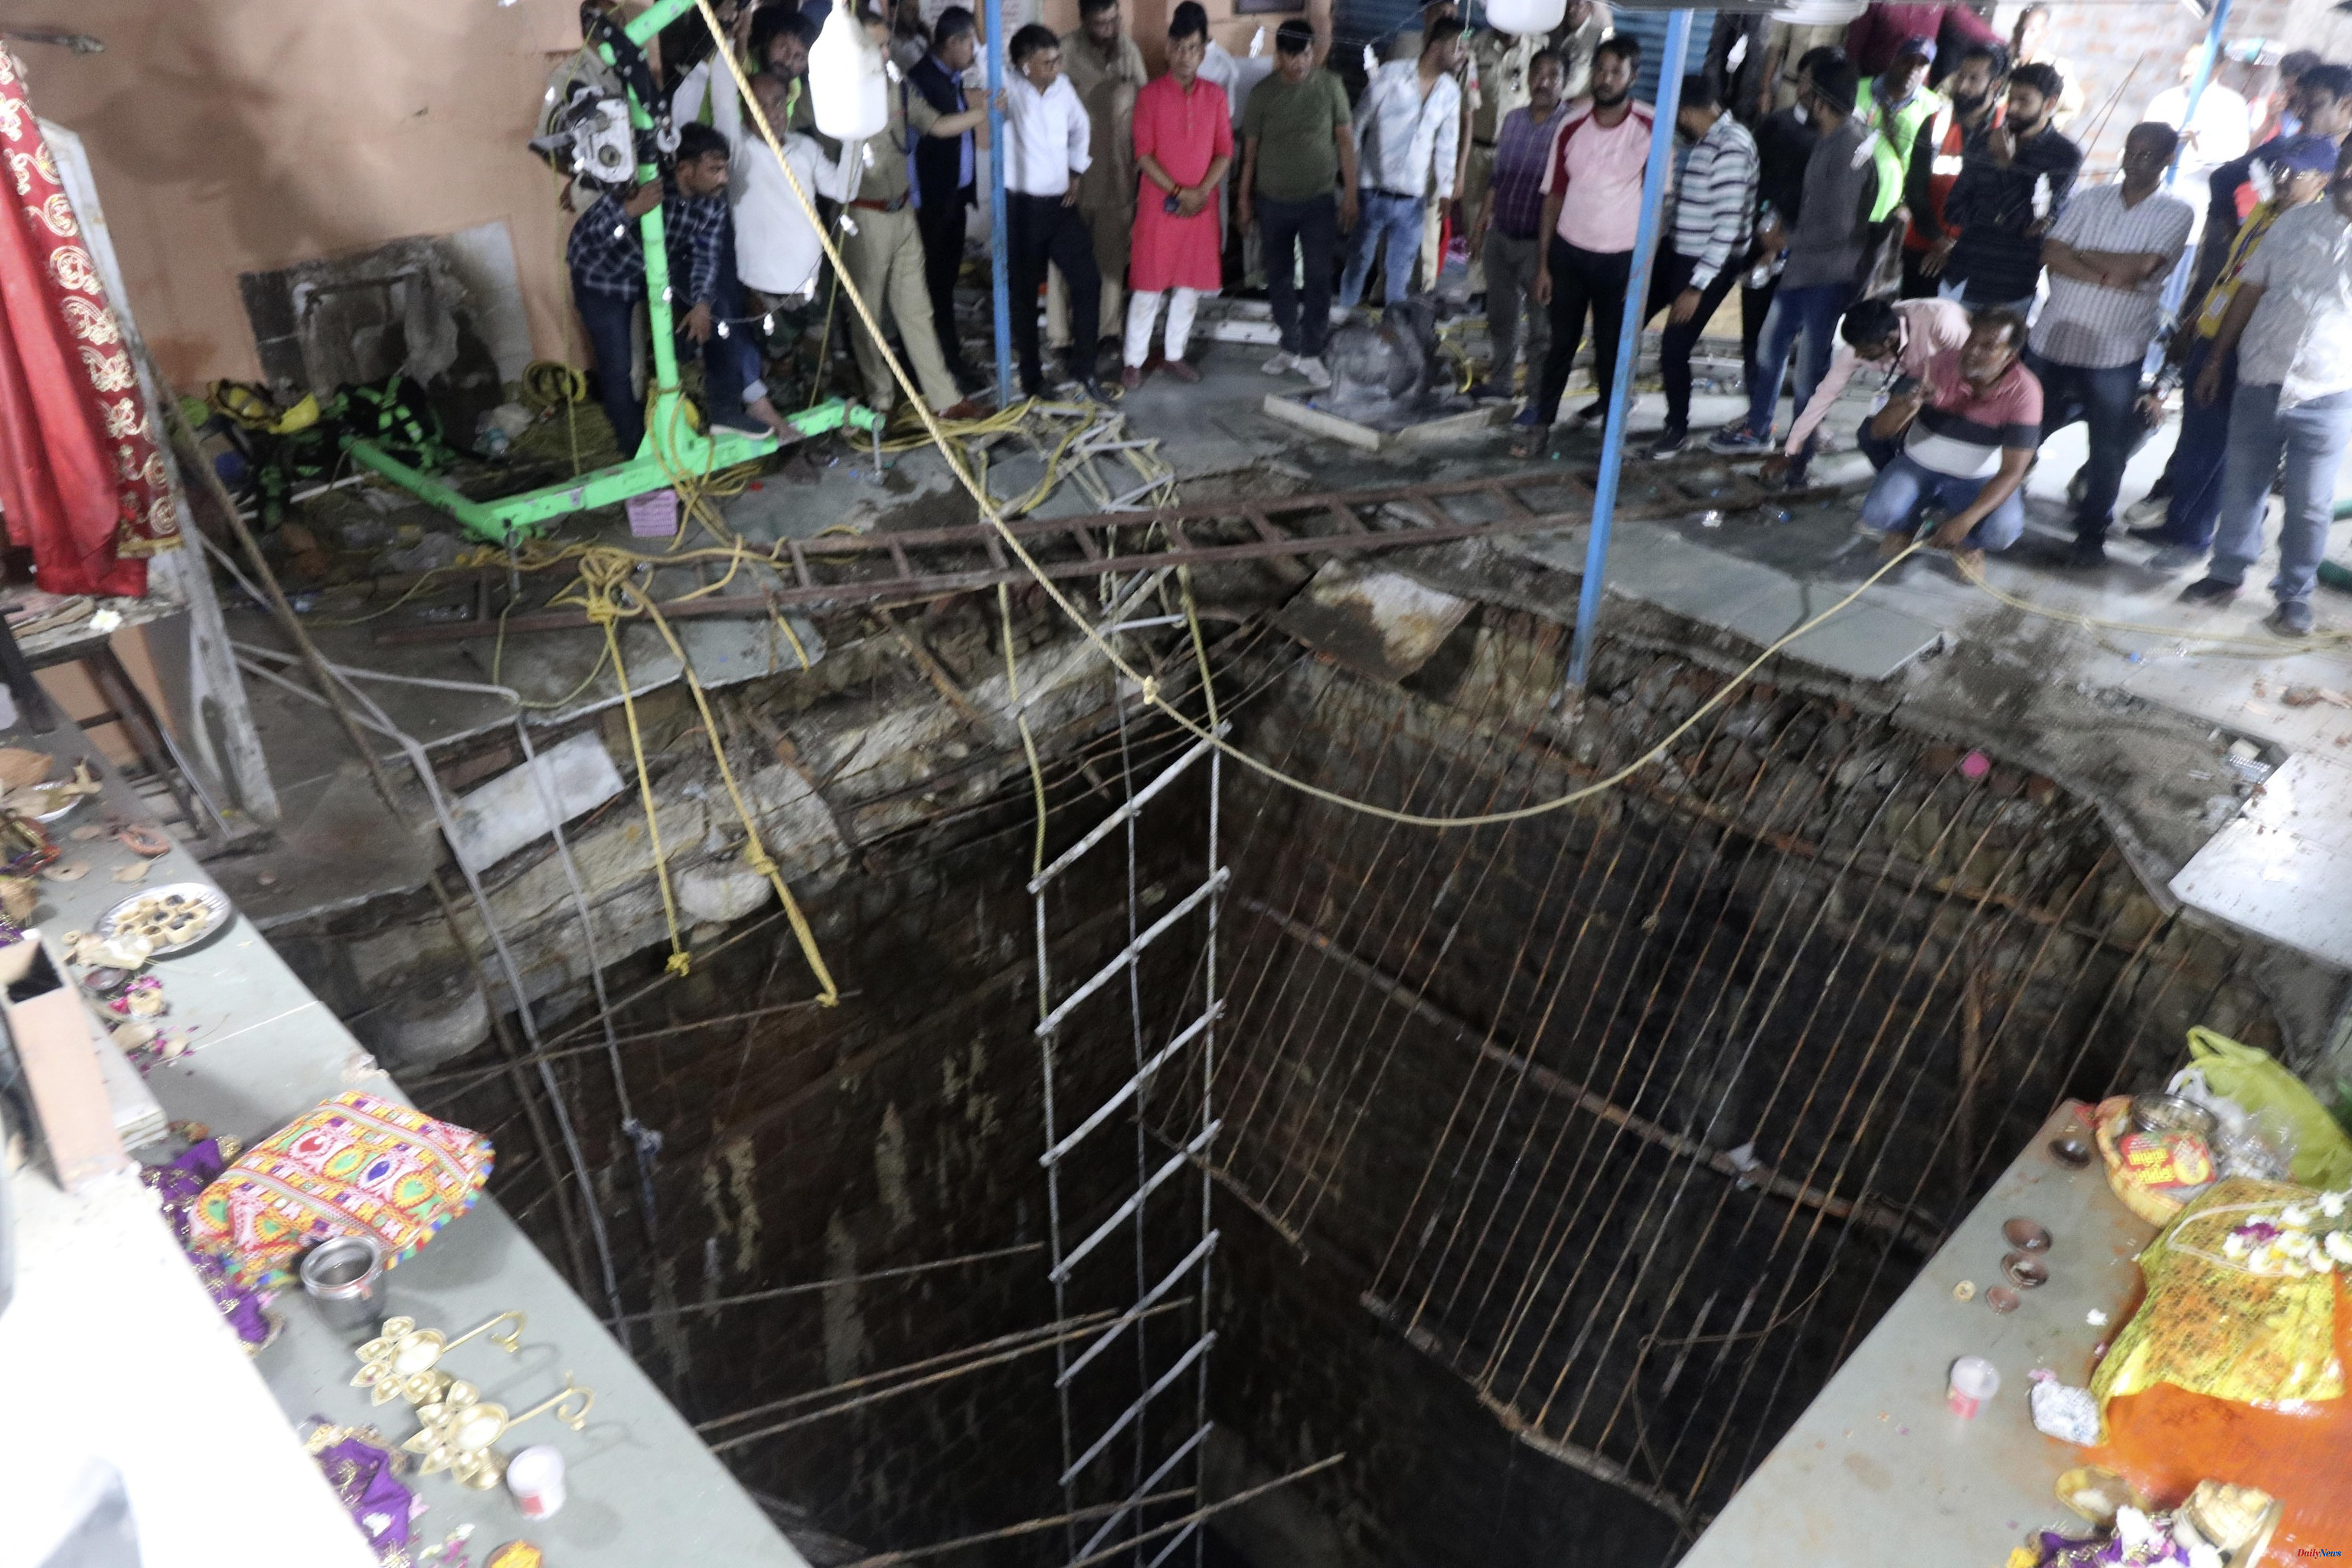 Asia At least 35 dead after the ground collapsed in a temple in India